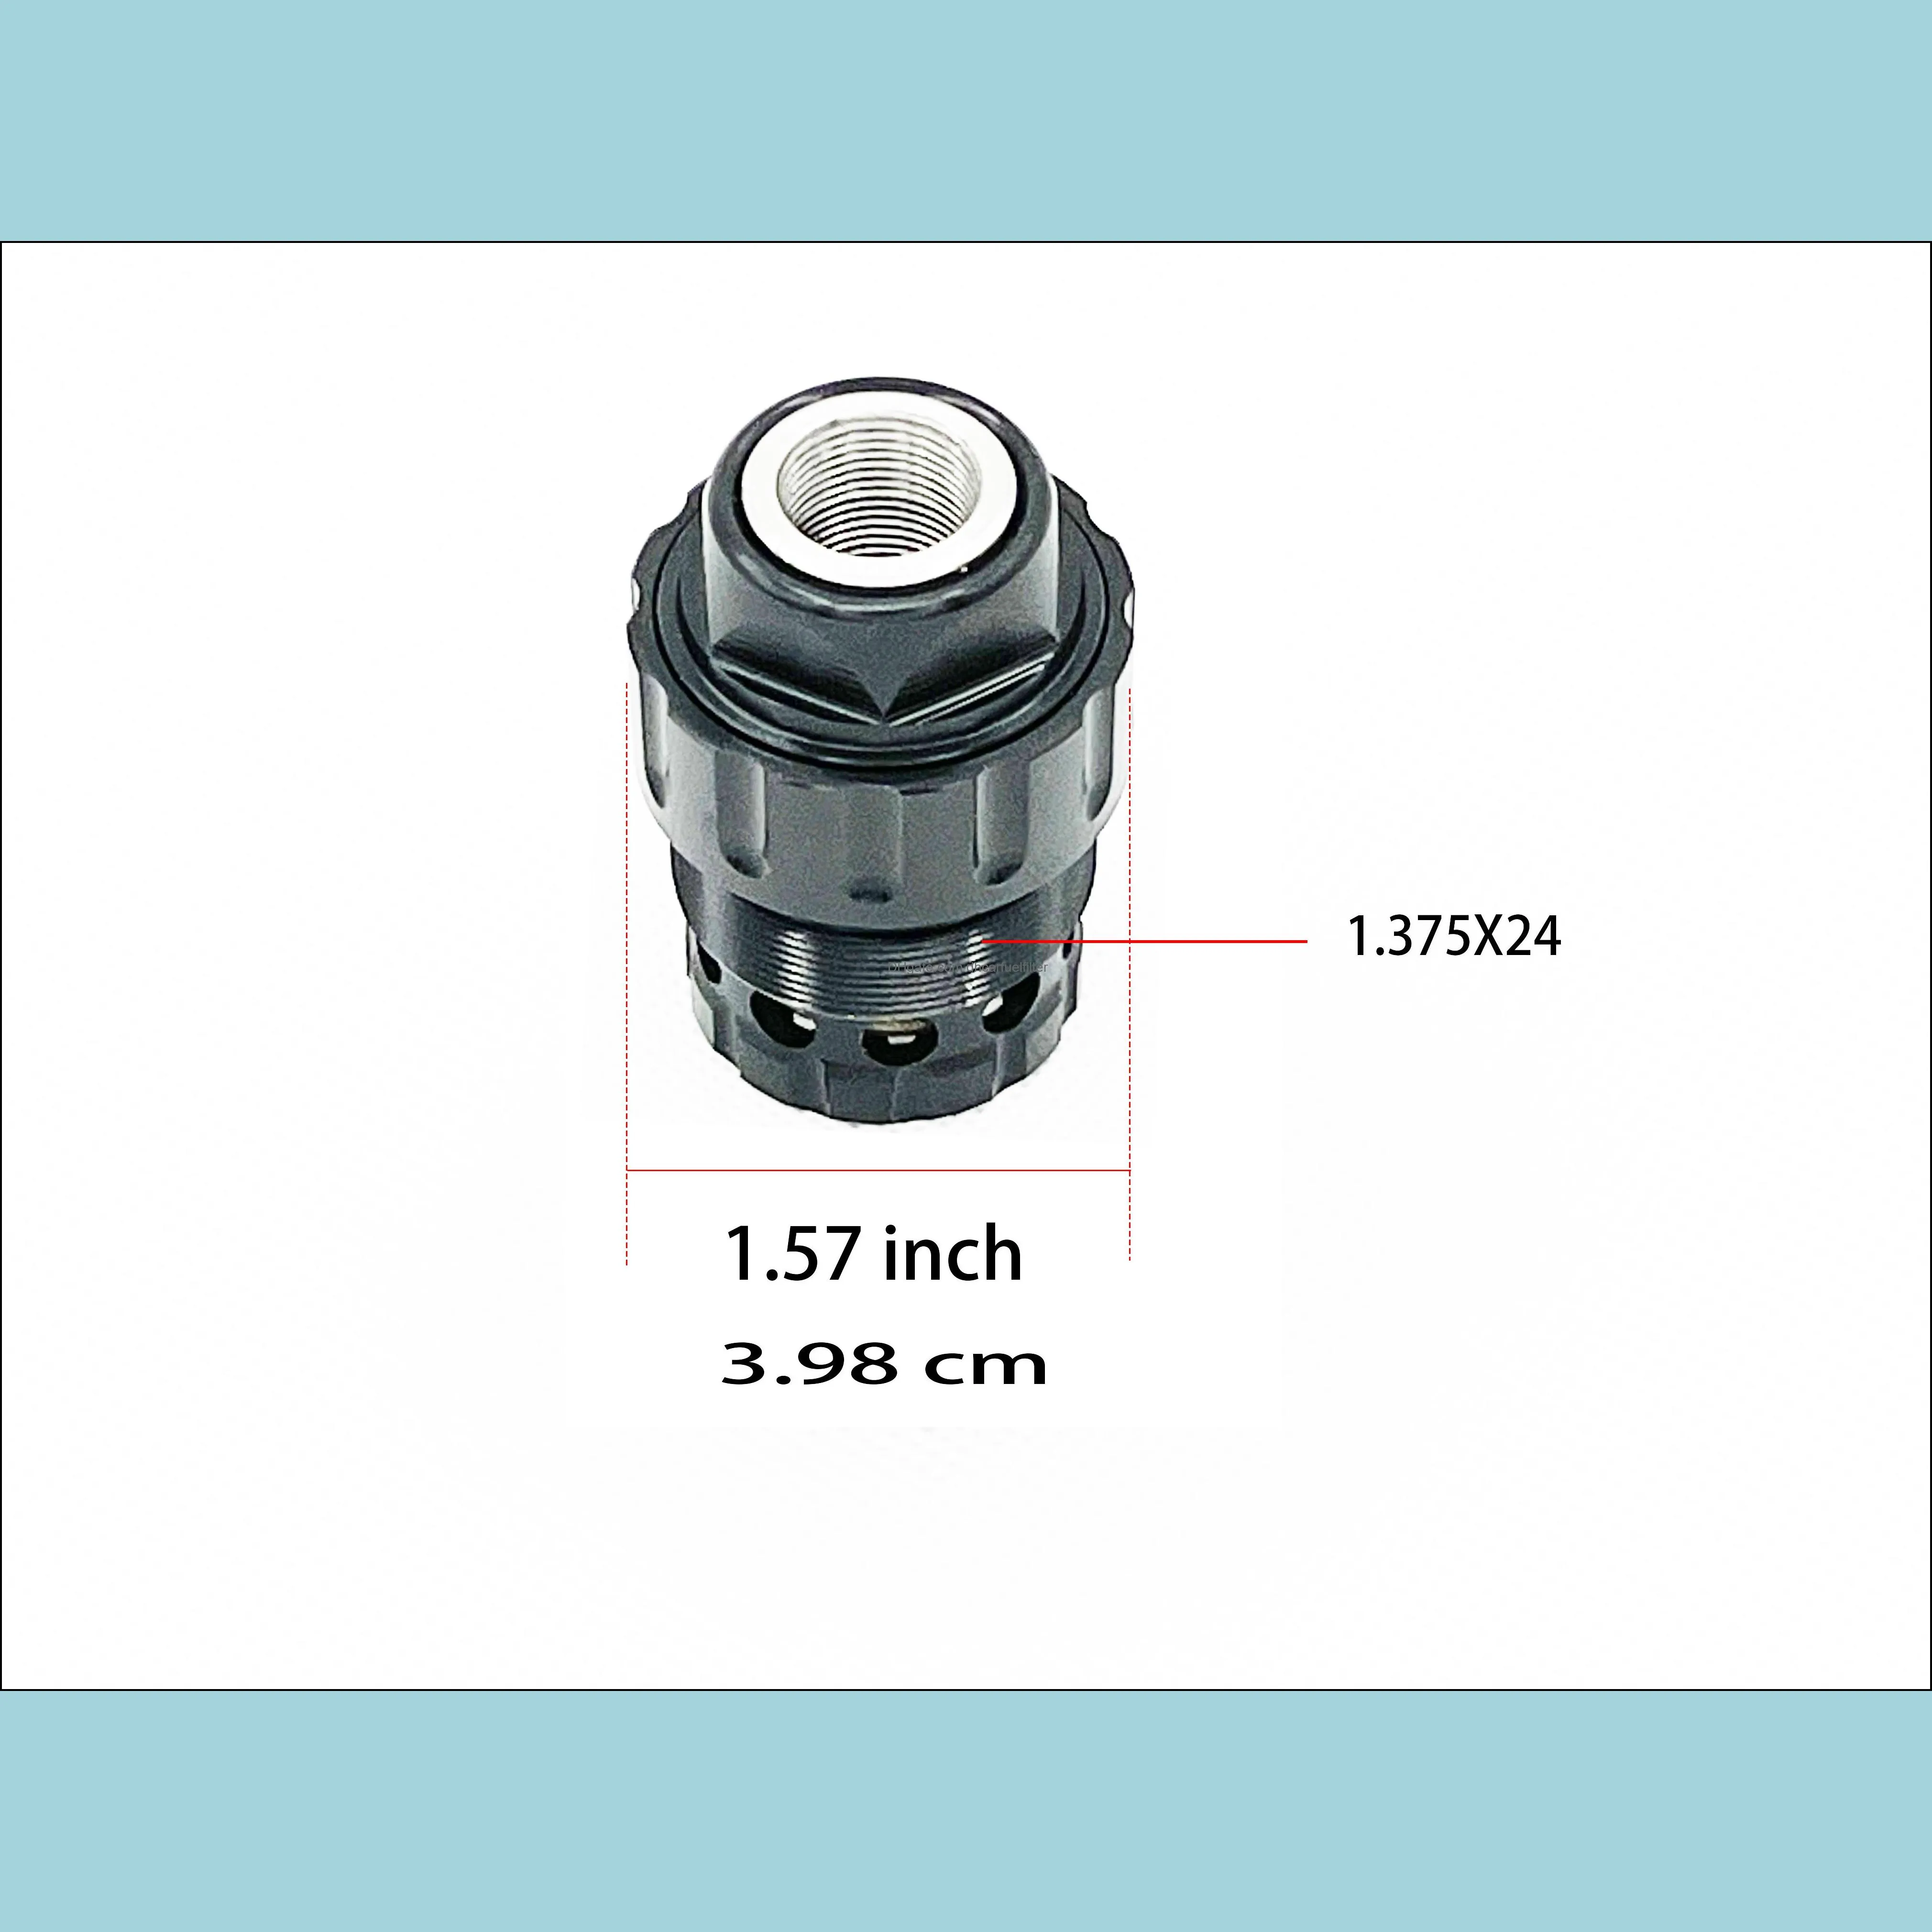 10mm fuel filter 1.7``x8.65``l solvent trap 1.375 x 24 aluminum tube 5/8x24 oil filter 1/2x28 oil catching cleaning device kits